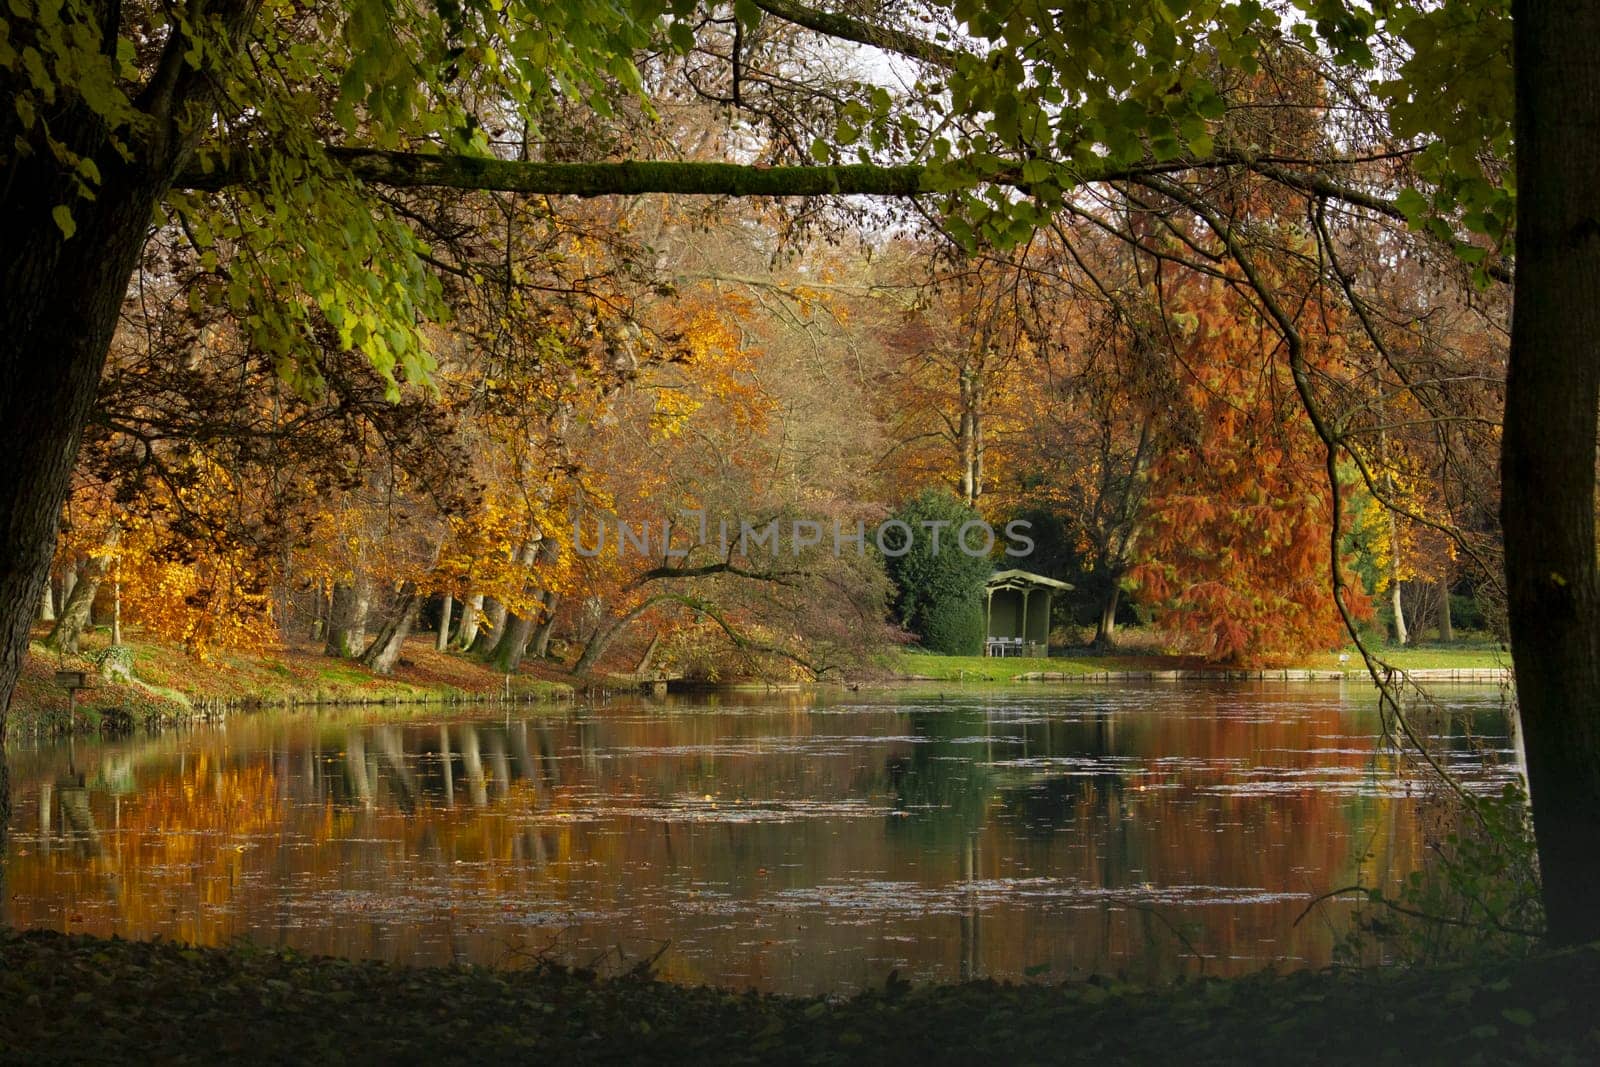 Picturesque autumn scenery with gazebo on the lake shore and colorful trees. by Maksym